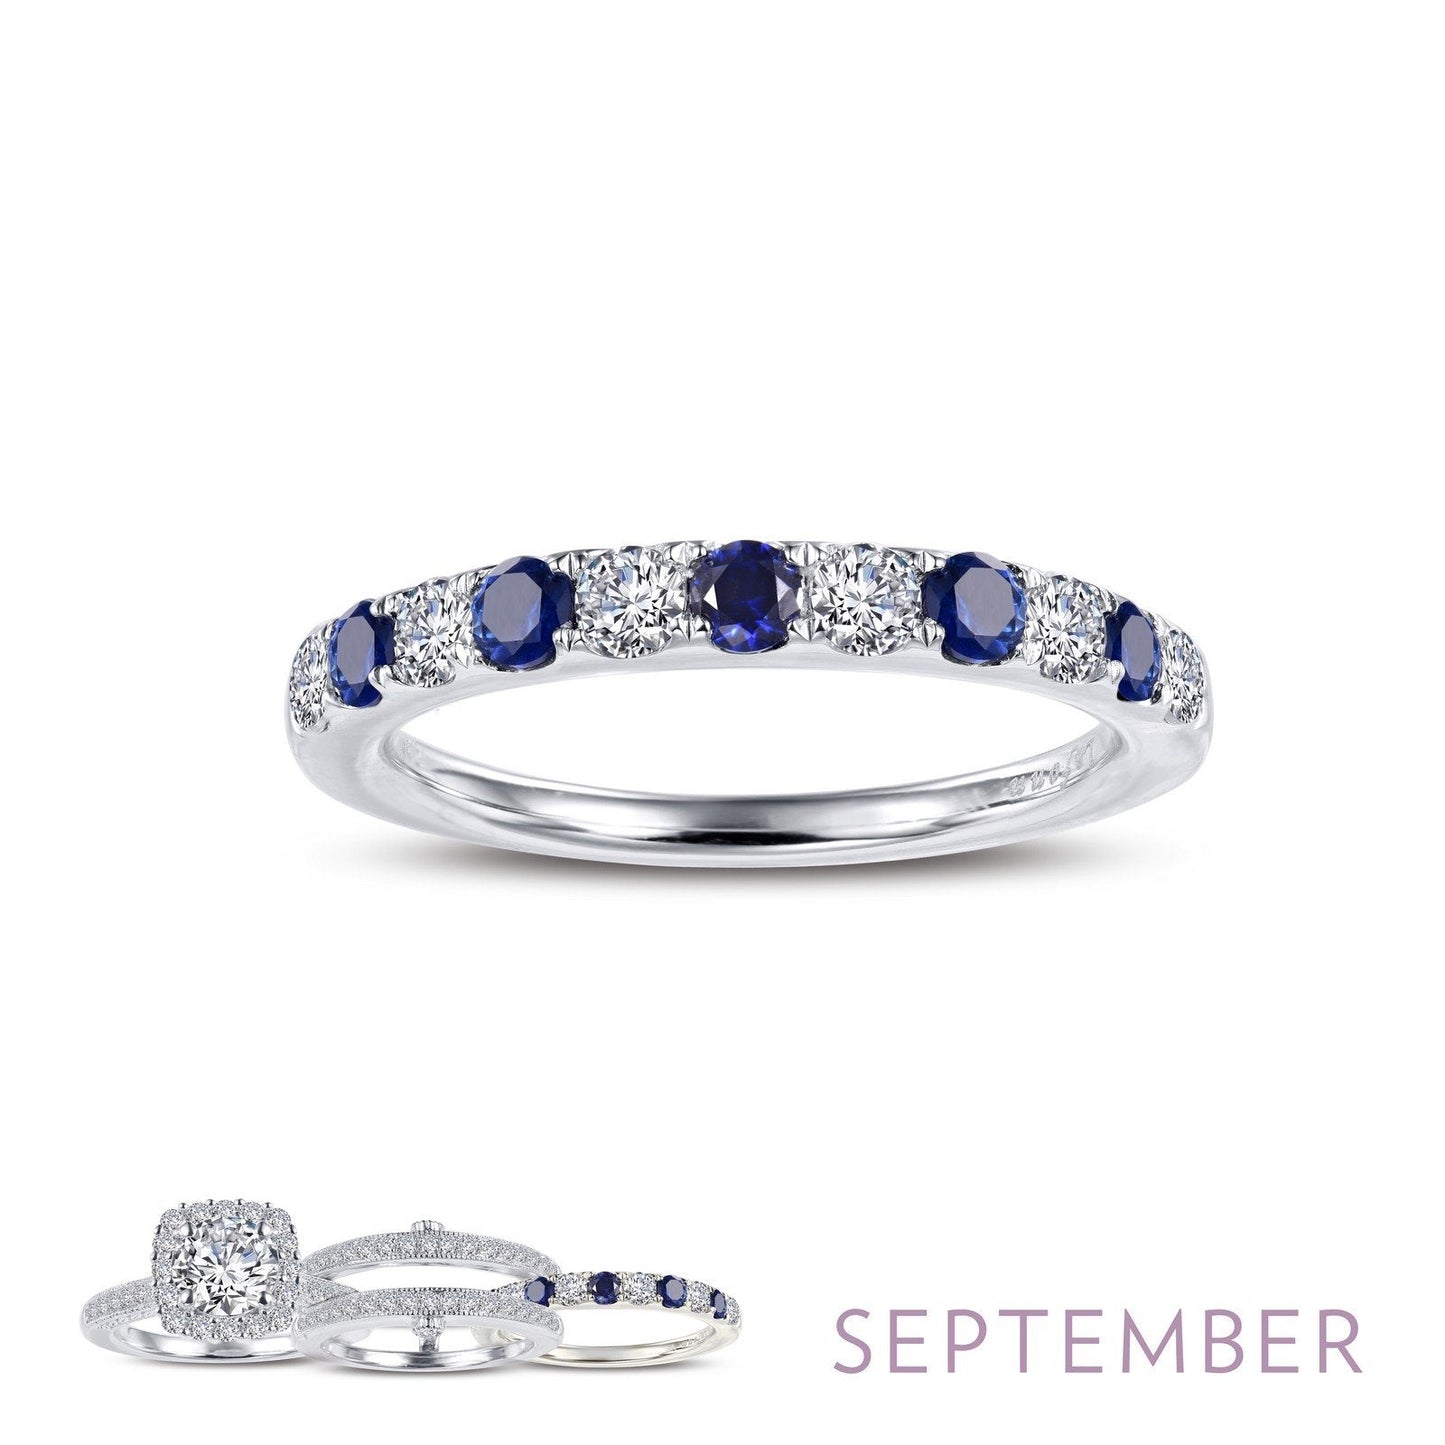 Load image into Gallery viewer, Lafonn September Birthstone Ring SEPTEMBER RINGS Size 10 Platinum 0.51cts CTS Approx.2.7mm(W)
